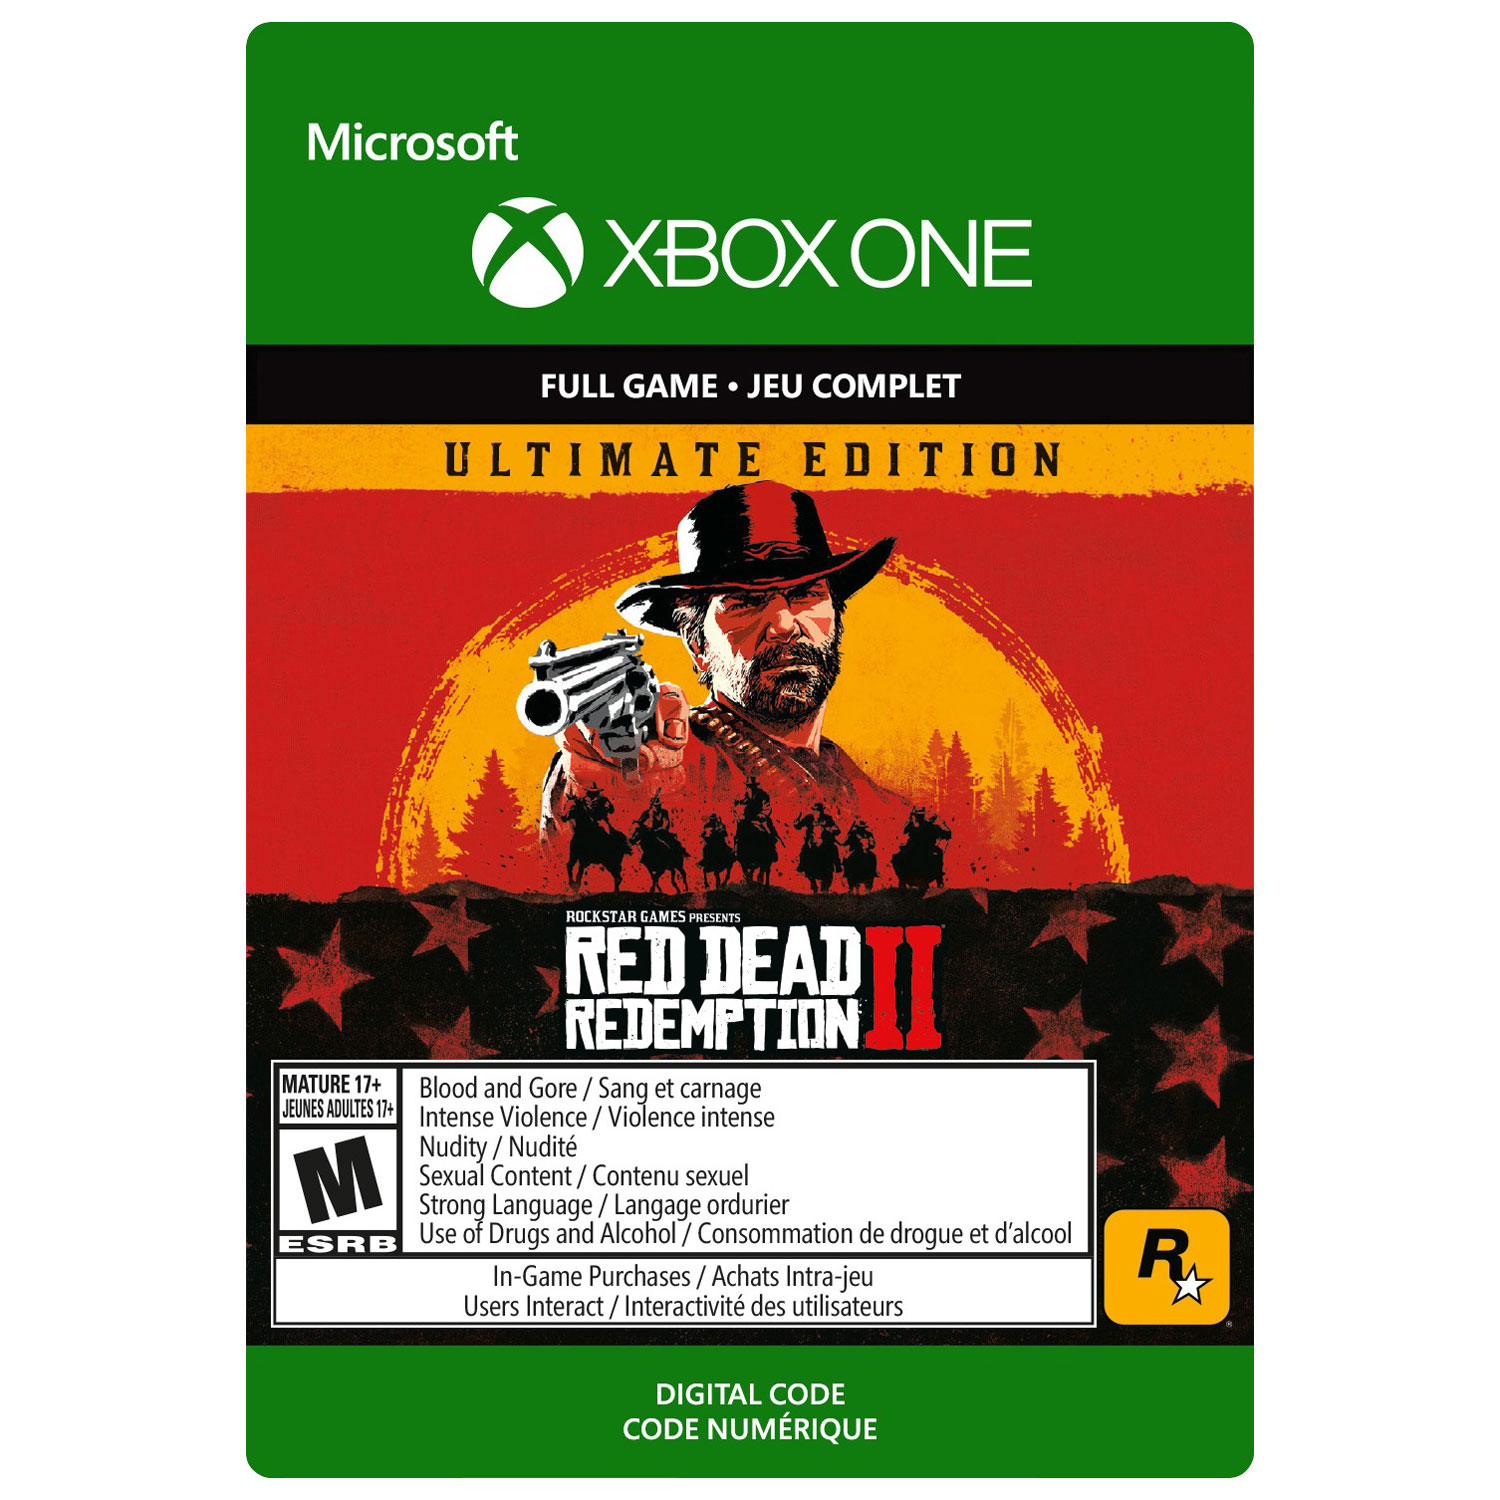 Red Dead Redemption 2 Ultimate Edition (Xbox One) - Digital Download